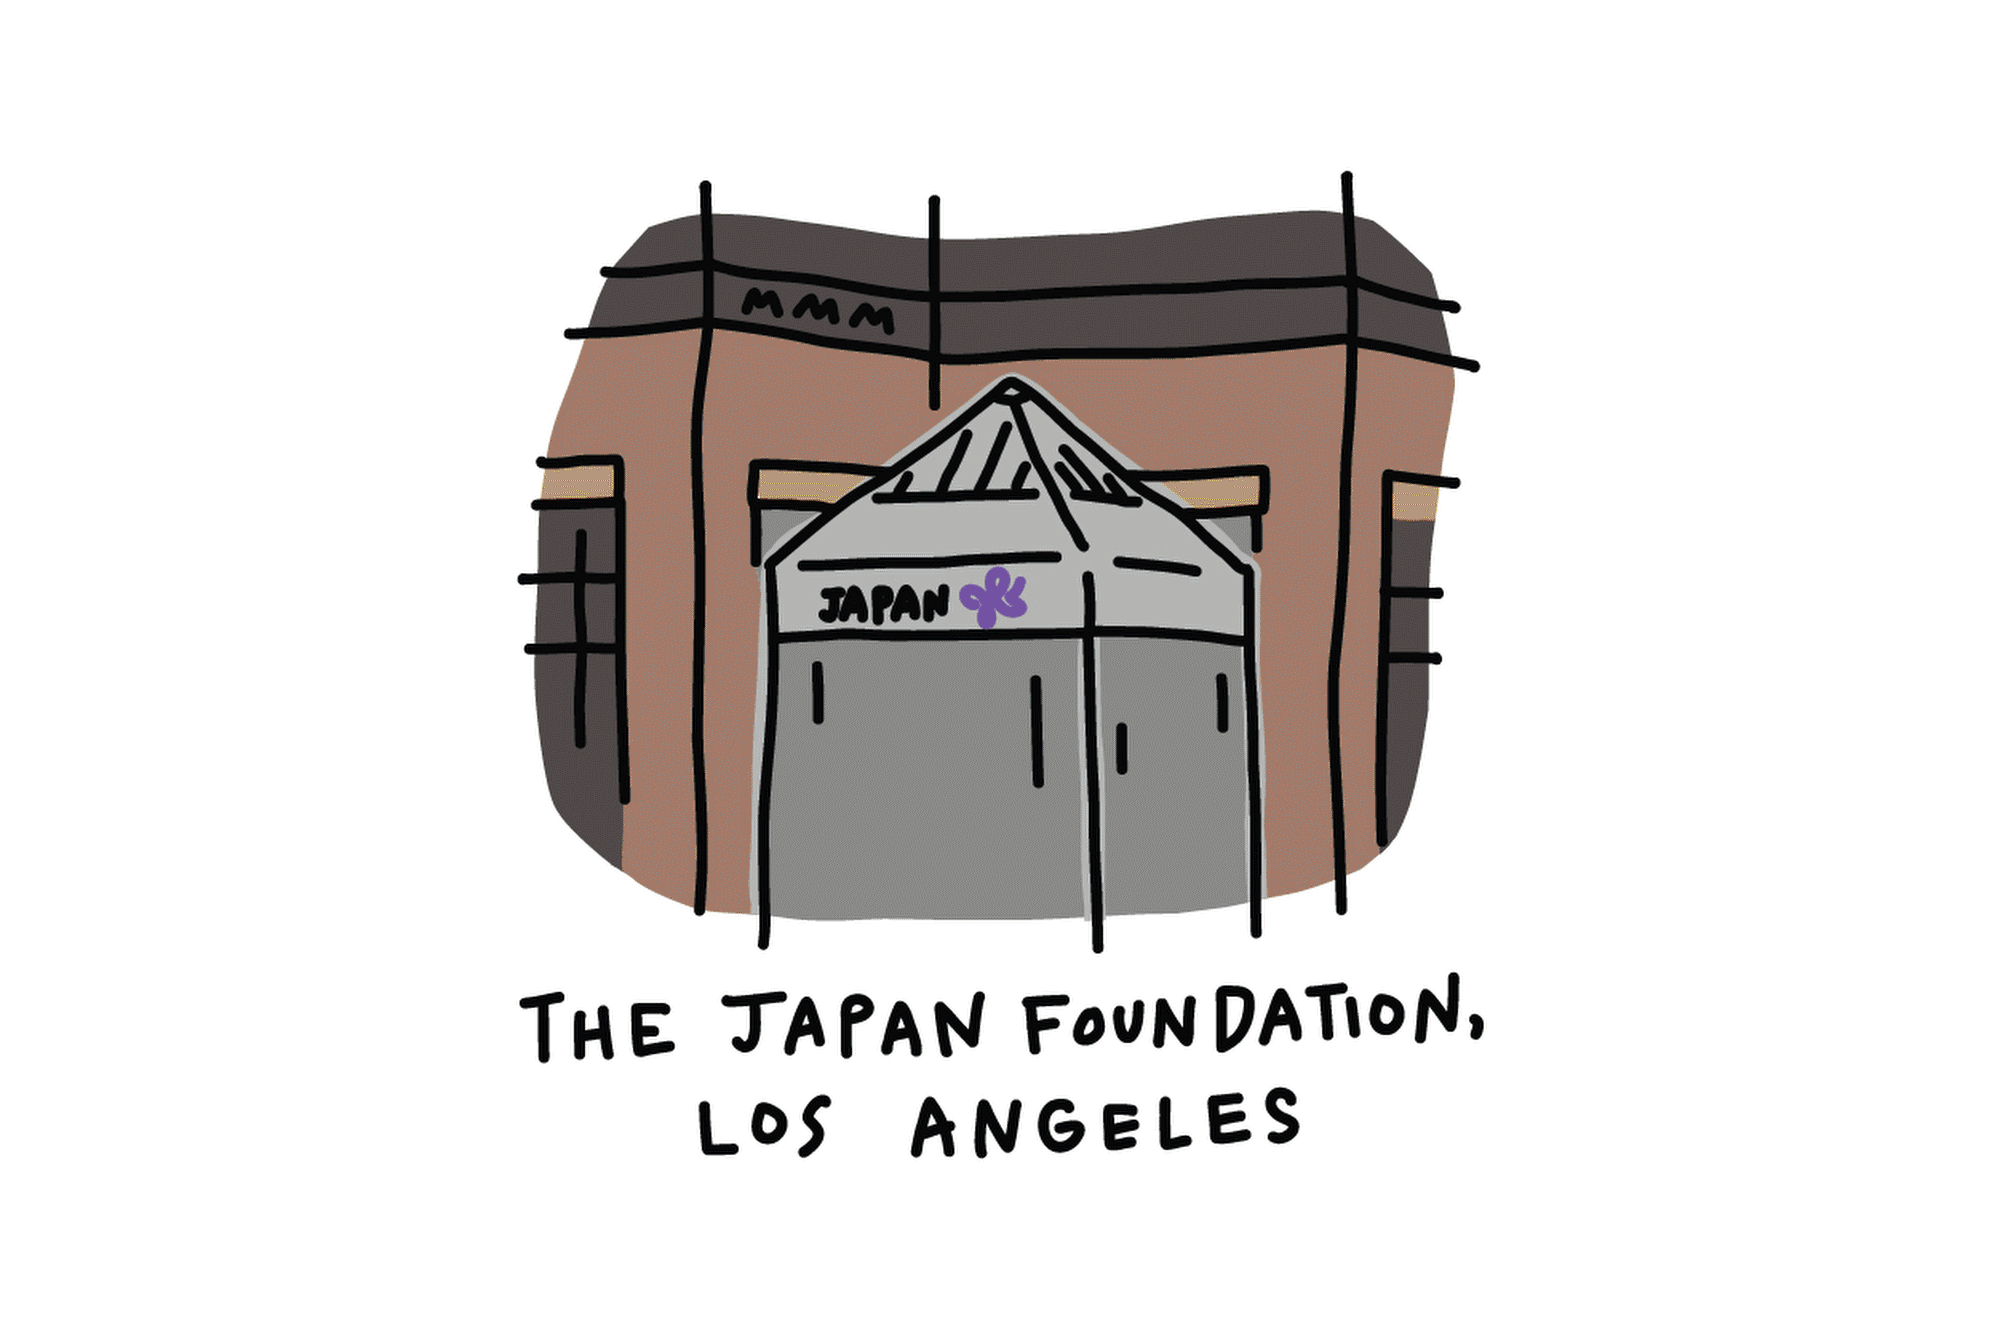 Illustrations of some of the other cultural destinations within walking distance of the Academy Museum of Motion Pictures.